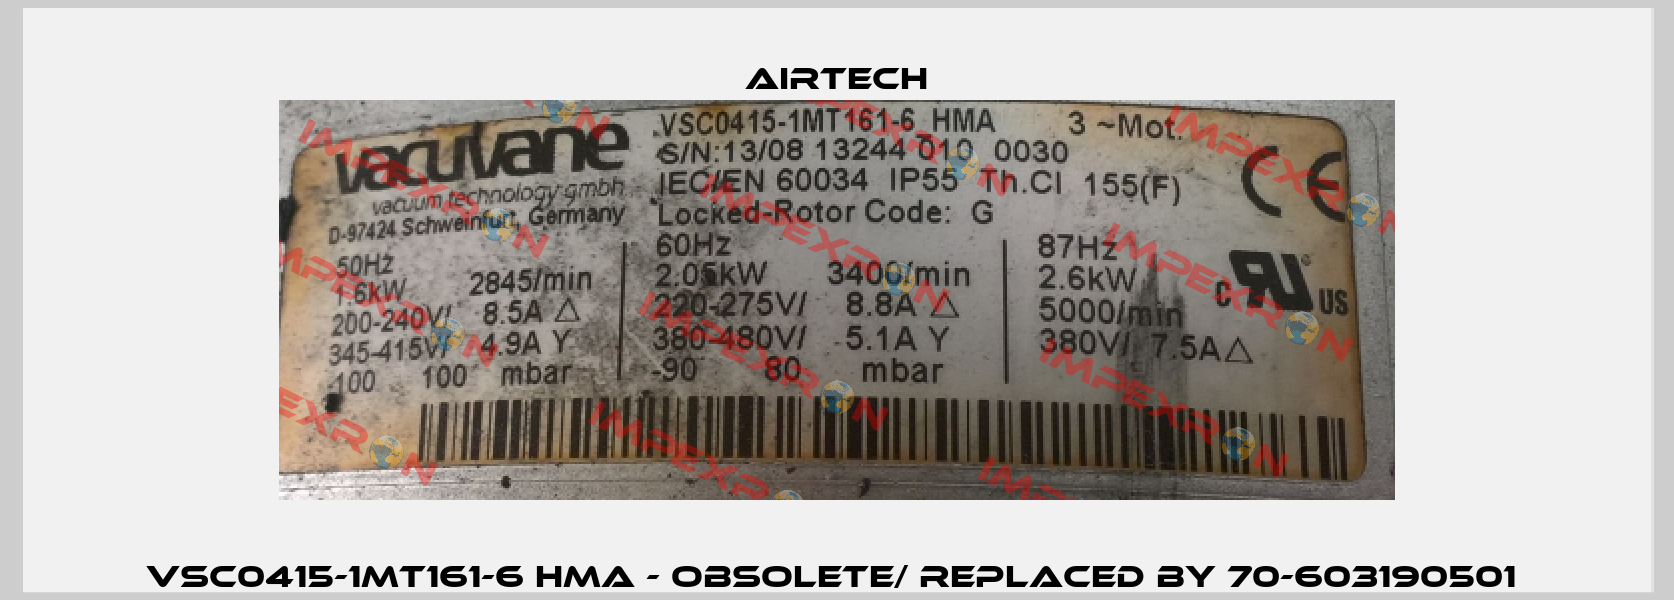 VSC0415-1MT161-6 HMA - obsolete/ replaced by 70-603190501  Airtech